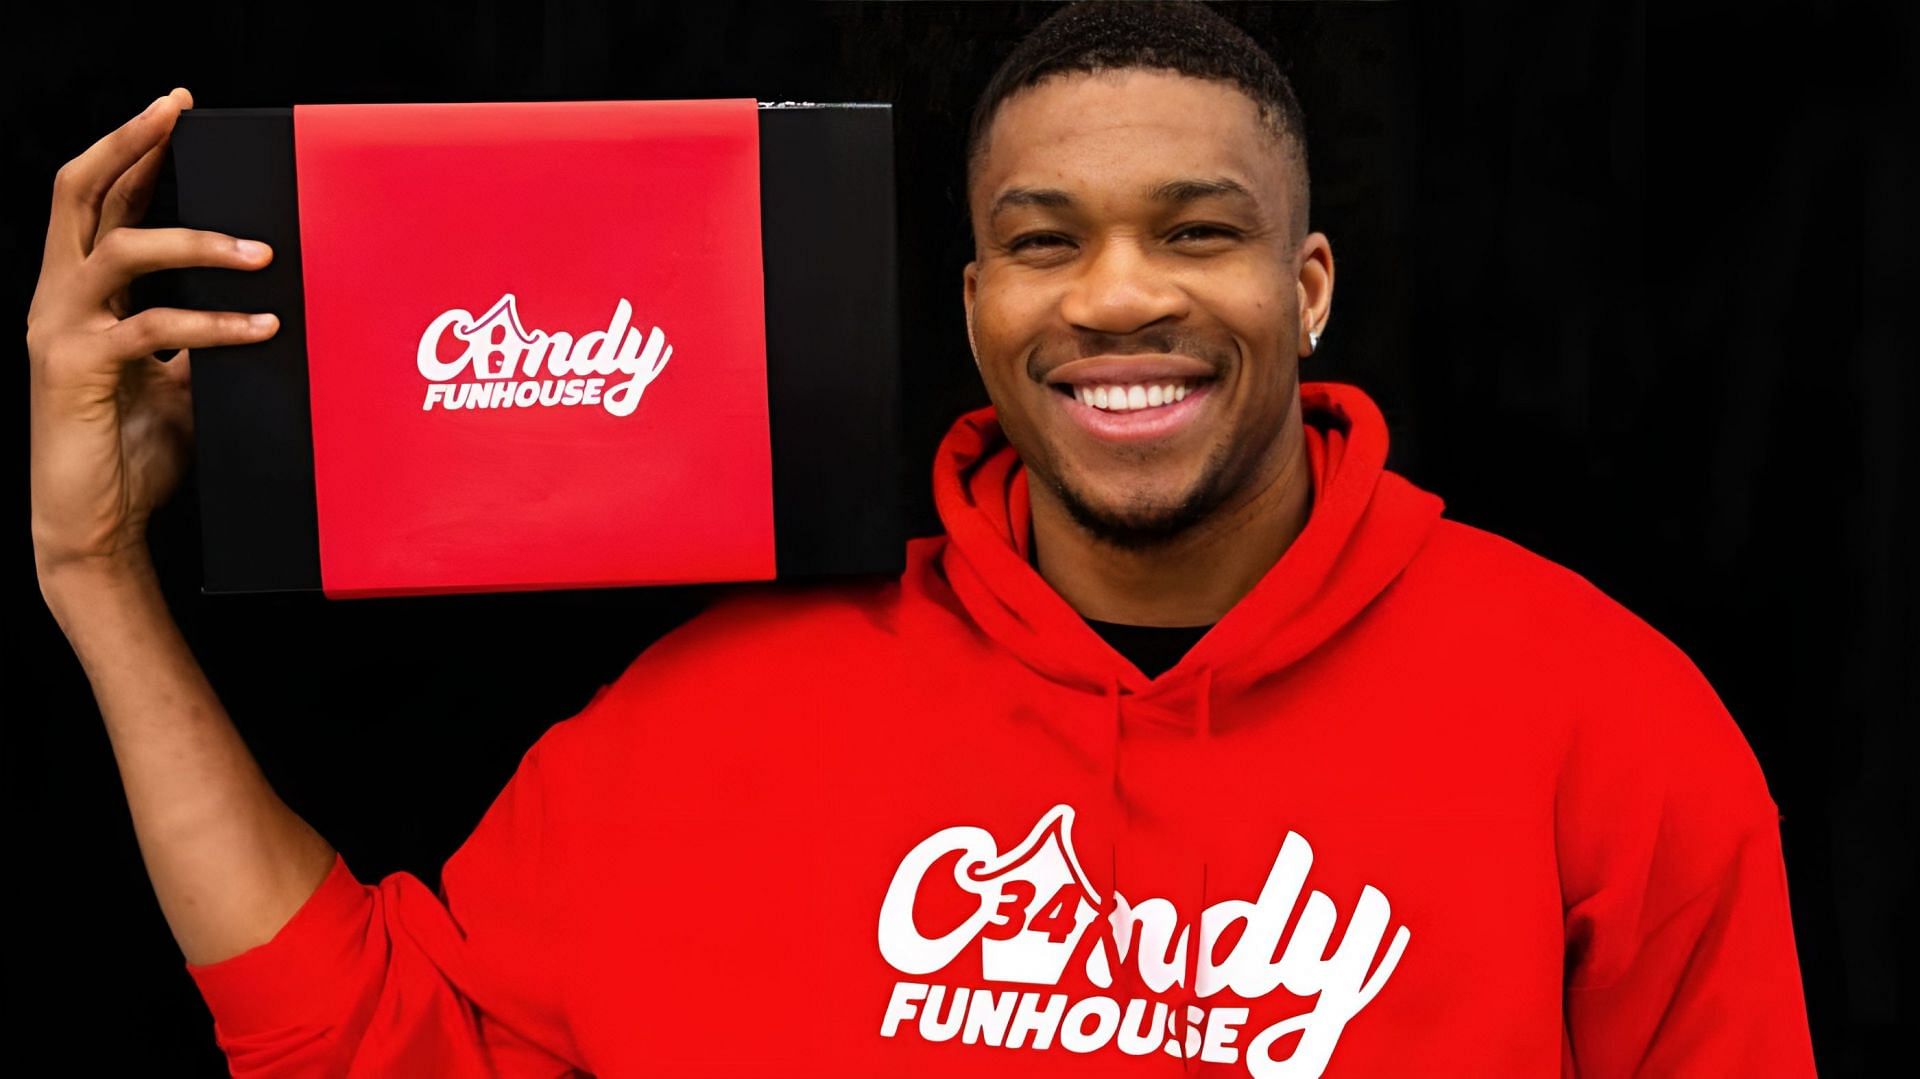 Milwaukee Bucks superstar forward Giannis Antetokounmpo promoting his candy company &quot;Candy Funhouse&quot;